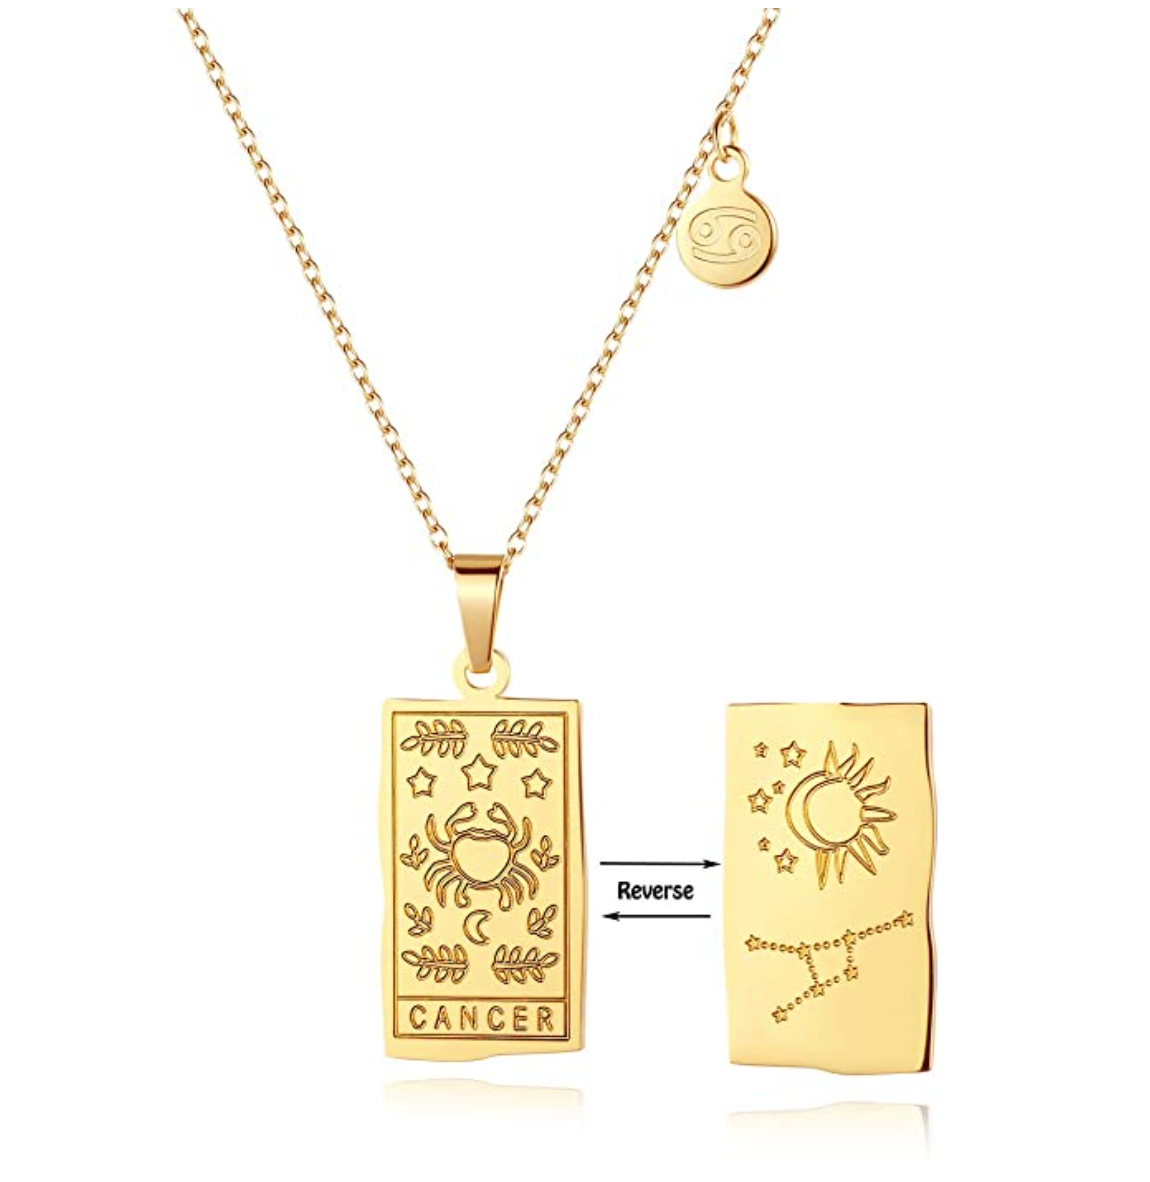 Zodiac double sided necklaces (Select your sign)